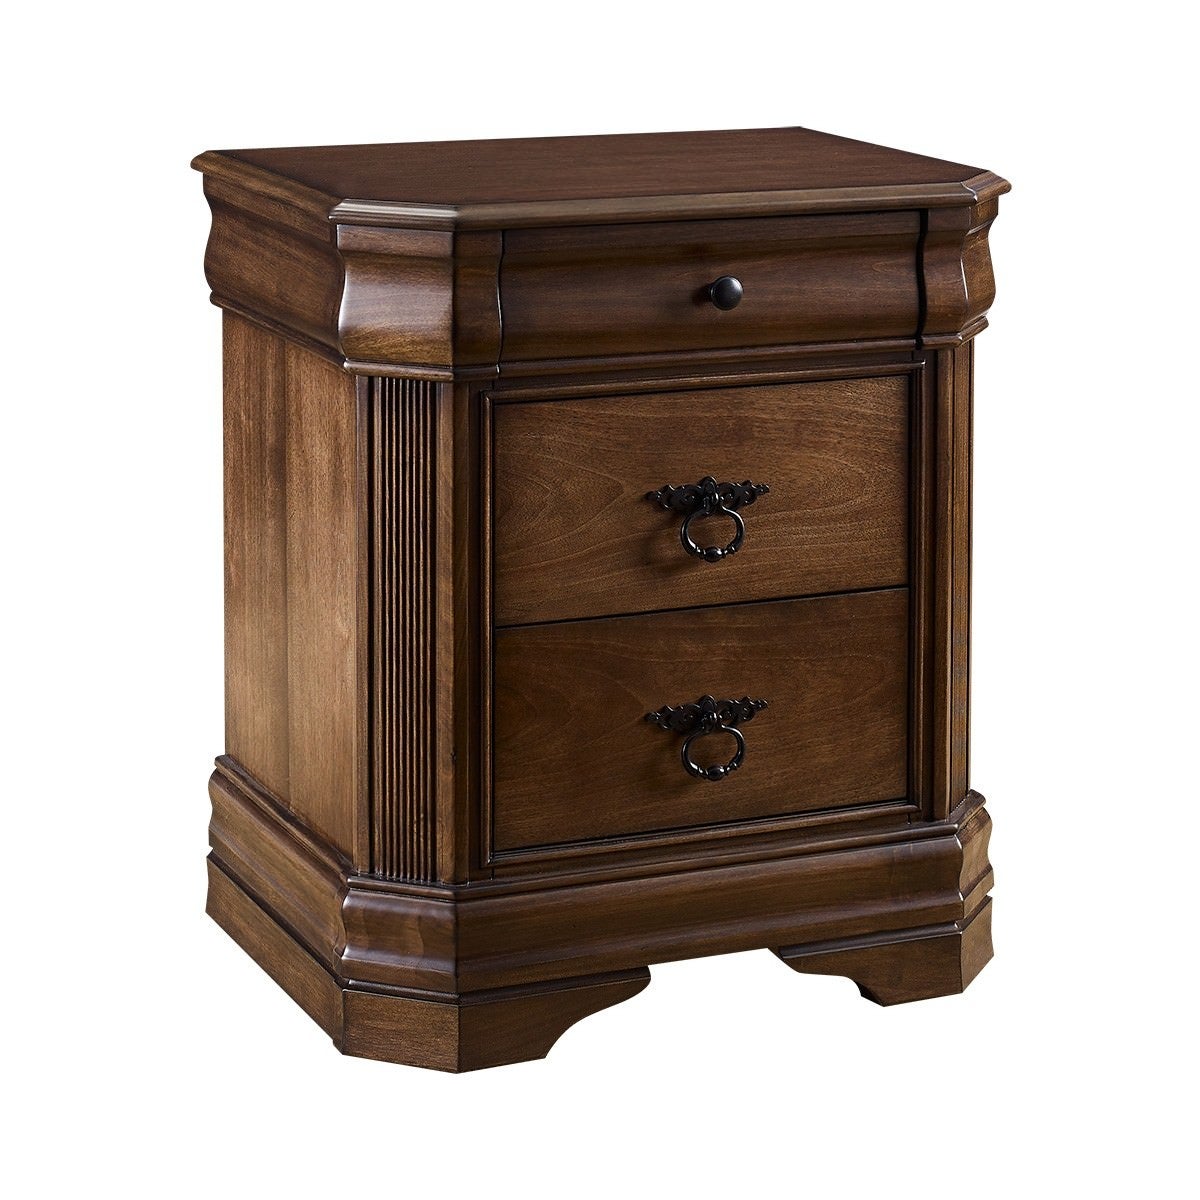 Clermont American Poplar Timber Bedside Table